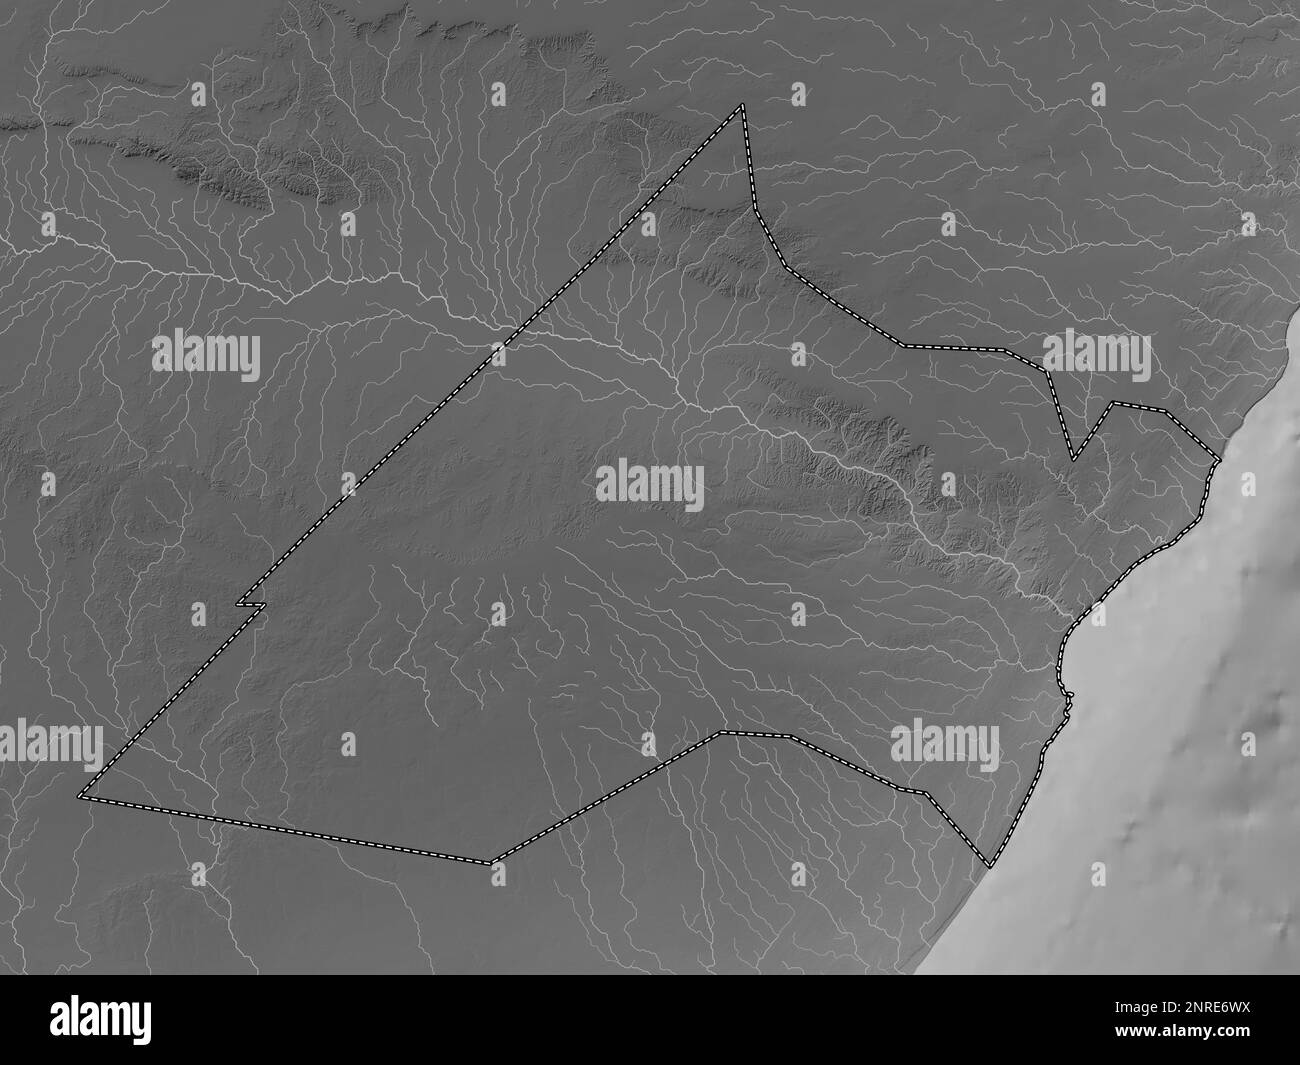 Nugaal, region of Somalia Mainland. Grayscale elevation map with lakes and rivers Stock Photo